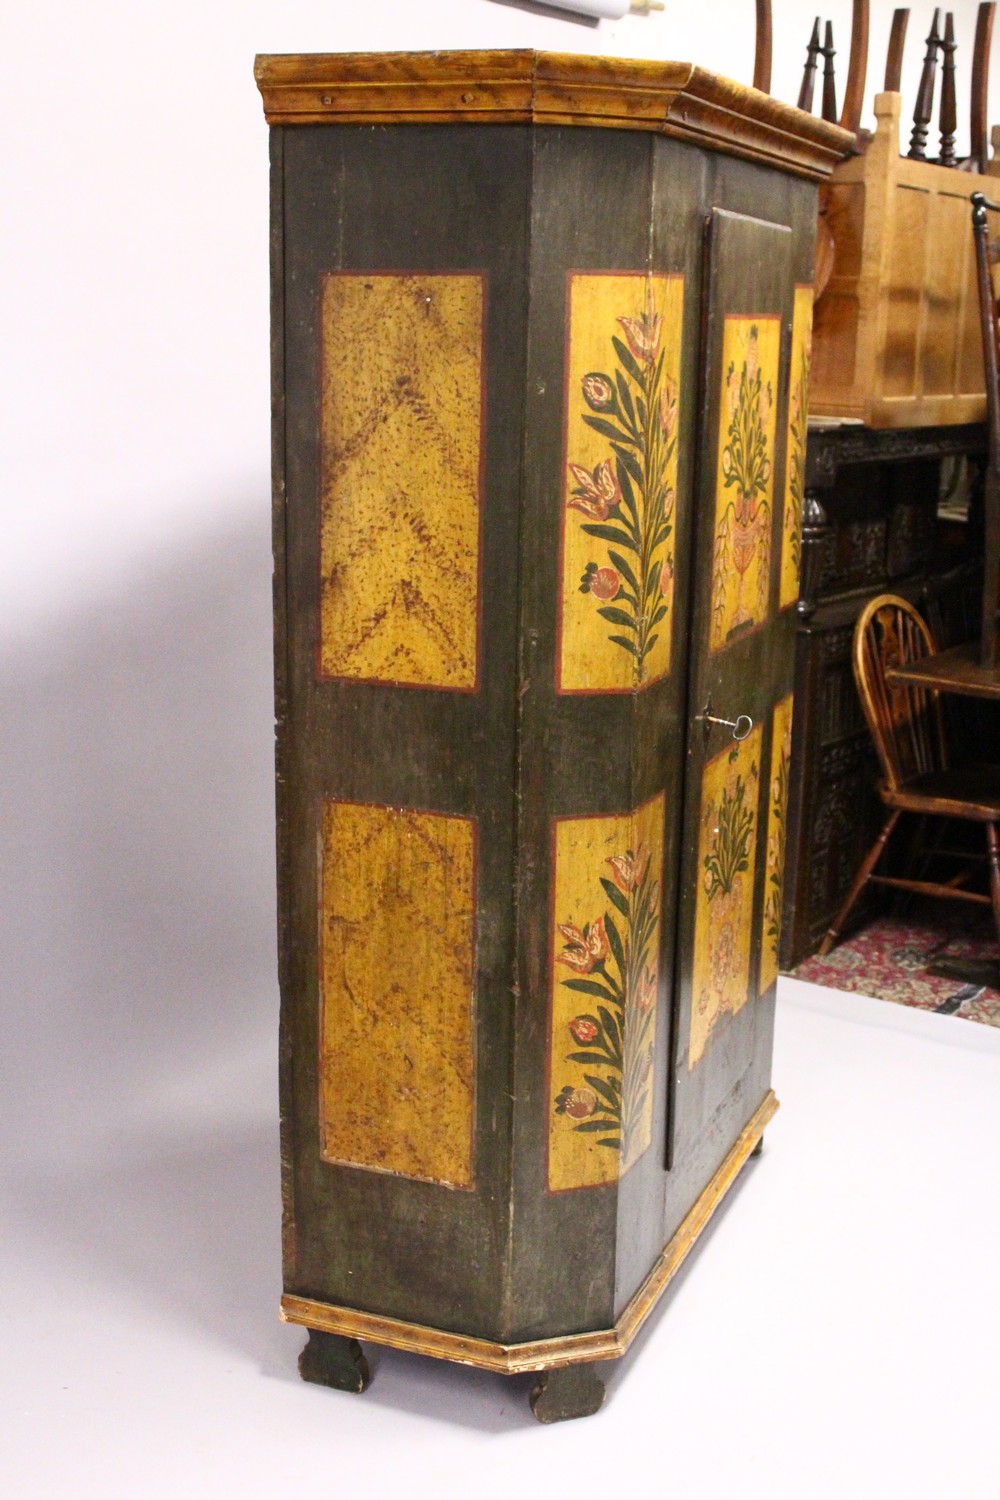 AN 18TH/19TH CENTURY AUSTRIAN PAINTED PINE CUPBOARD, with a single door, canted sides, all painted - Image 2 of 10